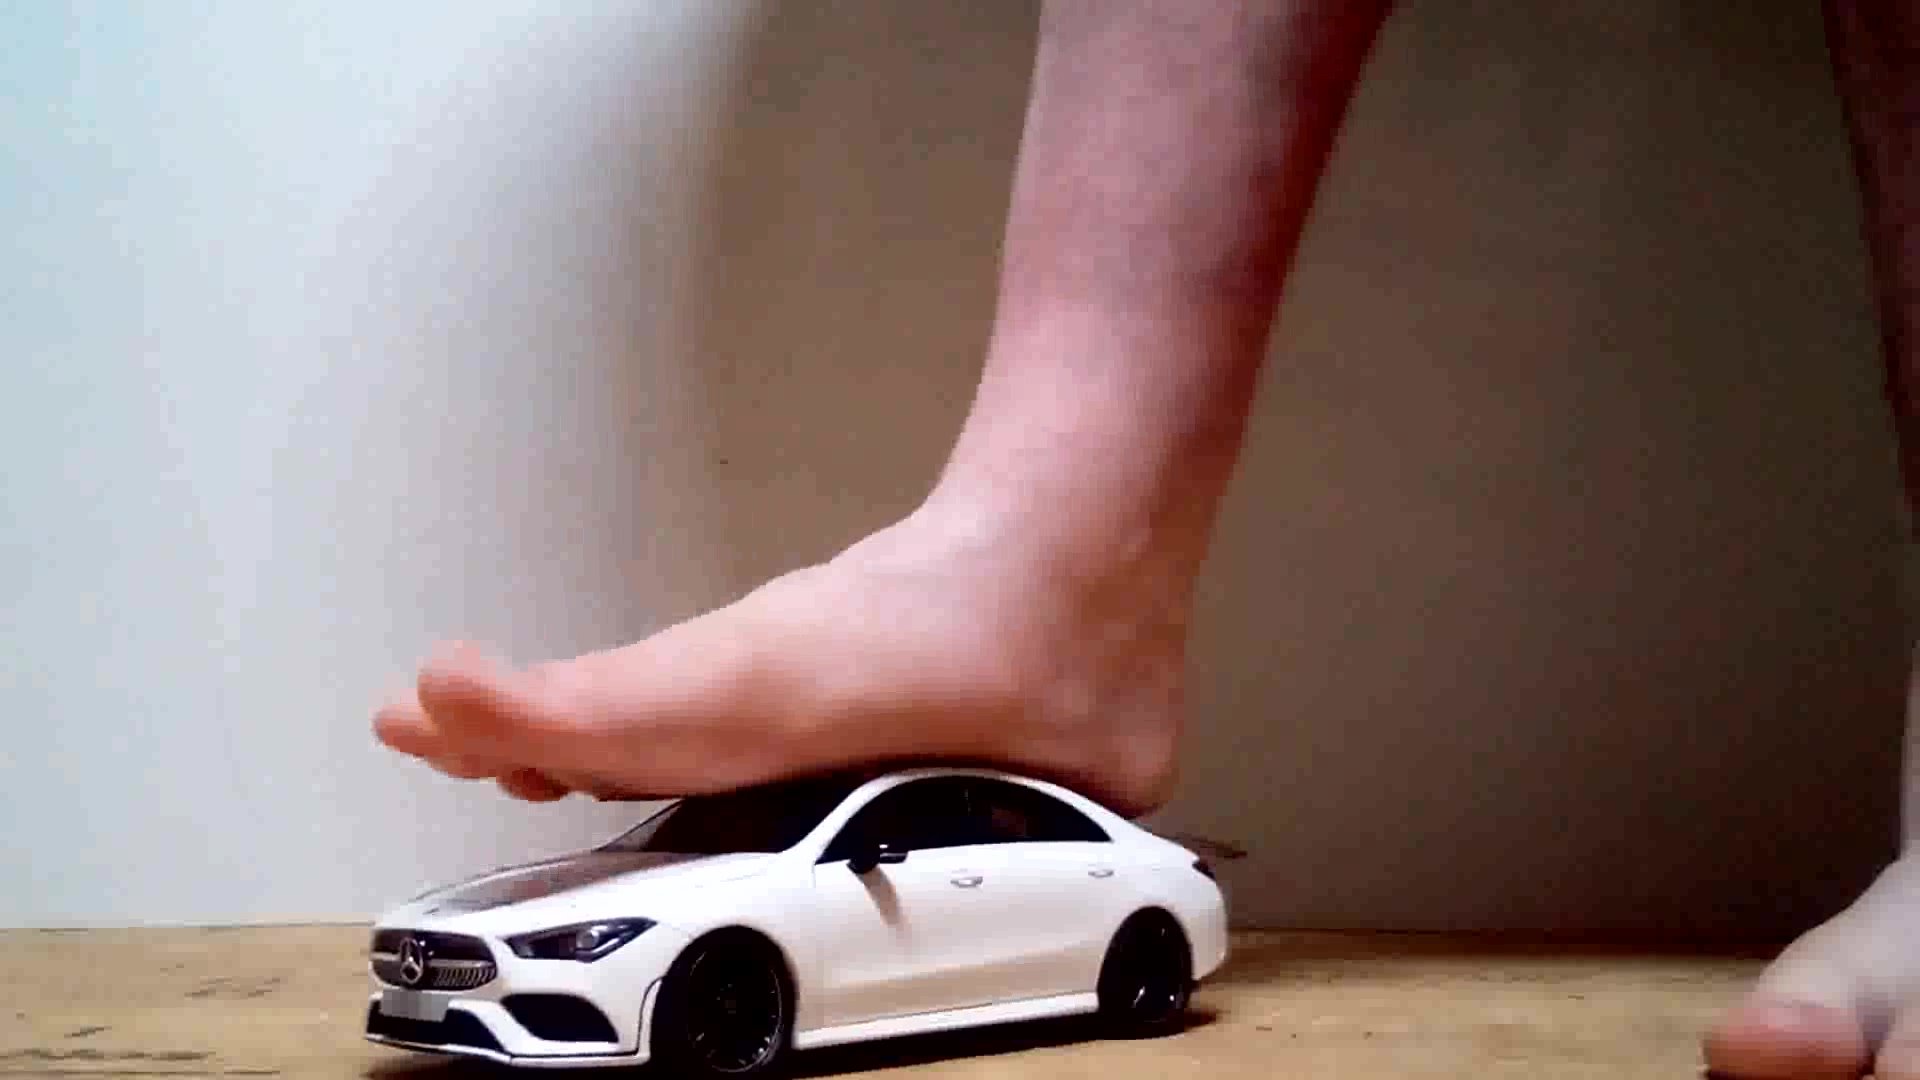 Barefoot toy car crush - video 3